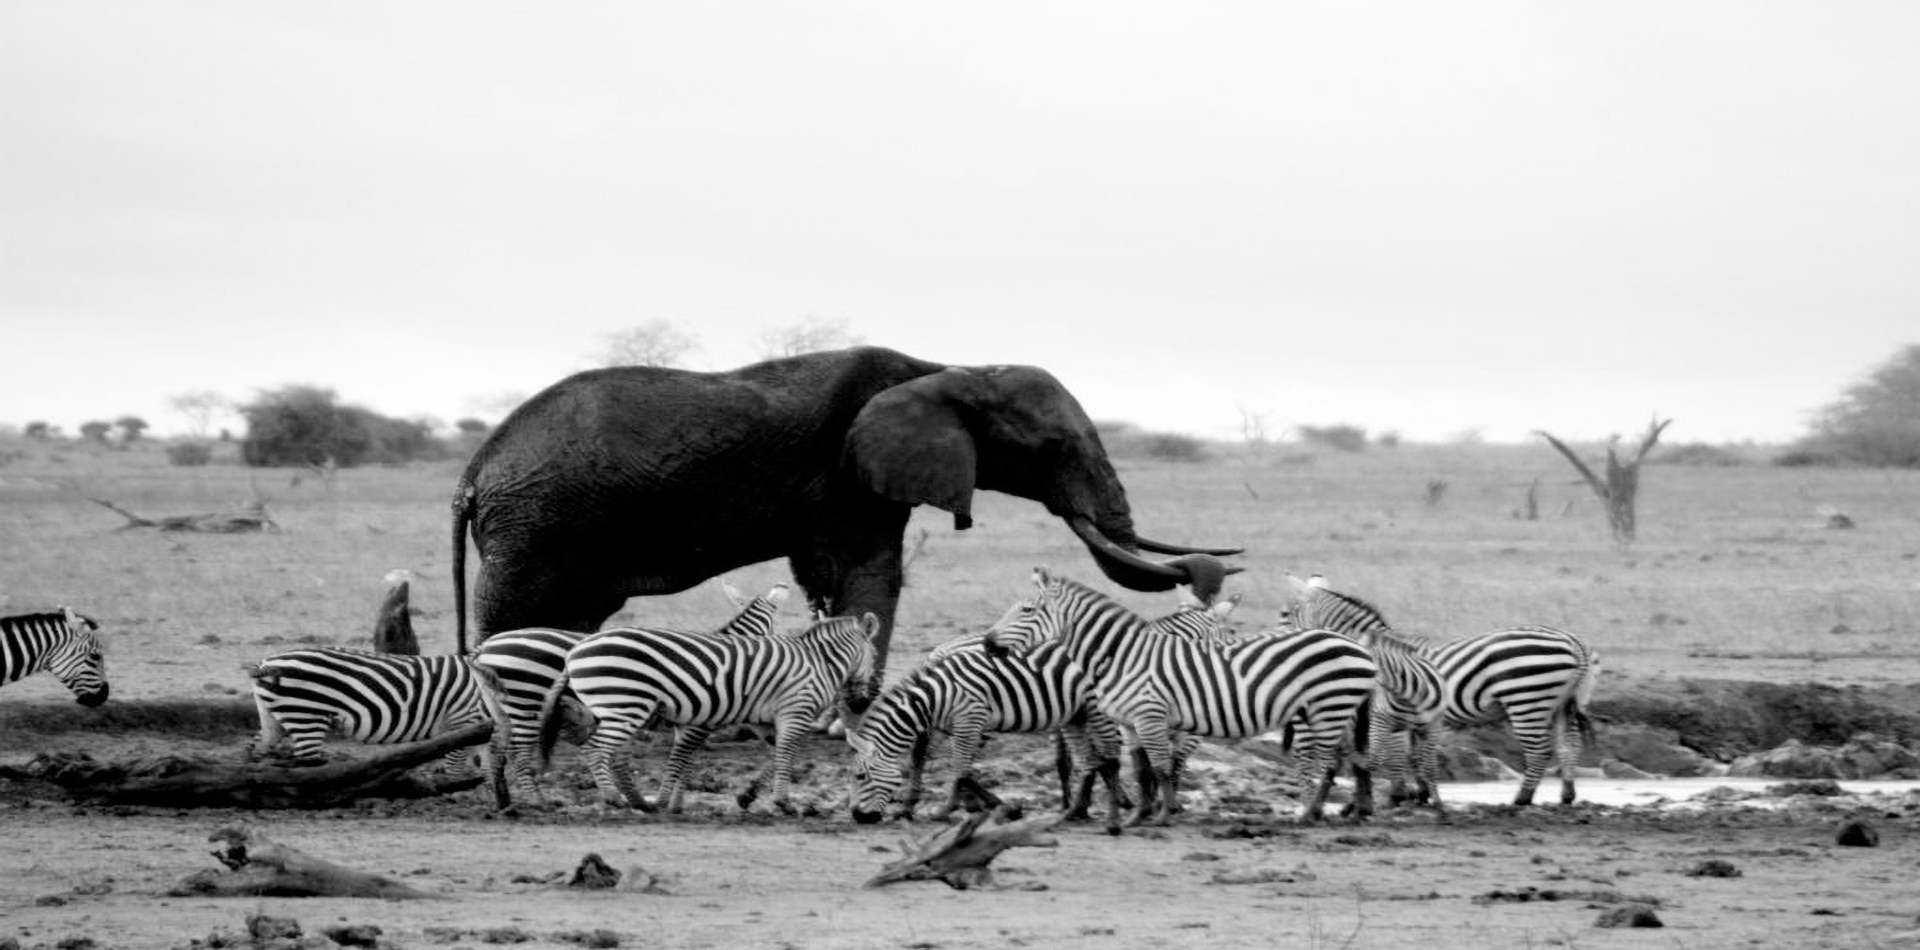 black-and-white-image-of-elephants-and-zebras-in-watering-hole